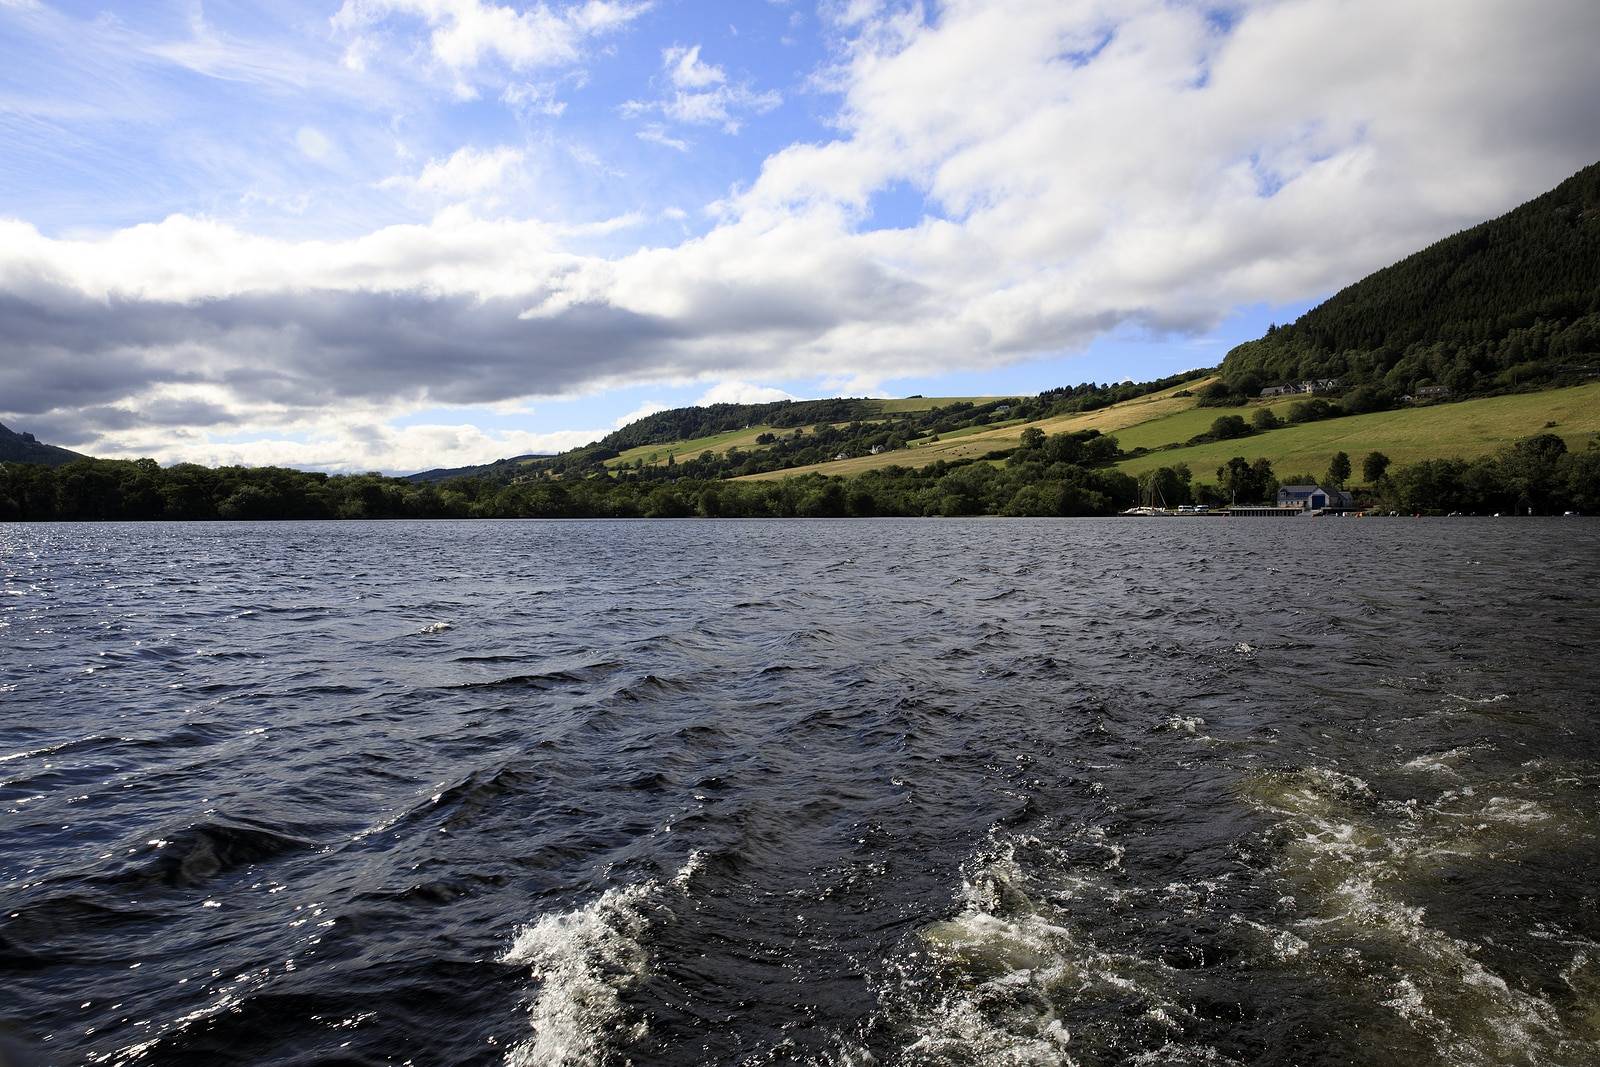 Loch Ness Monster Depicted Clearly in Photograph by Scotsman